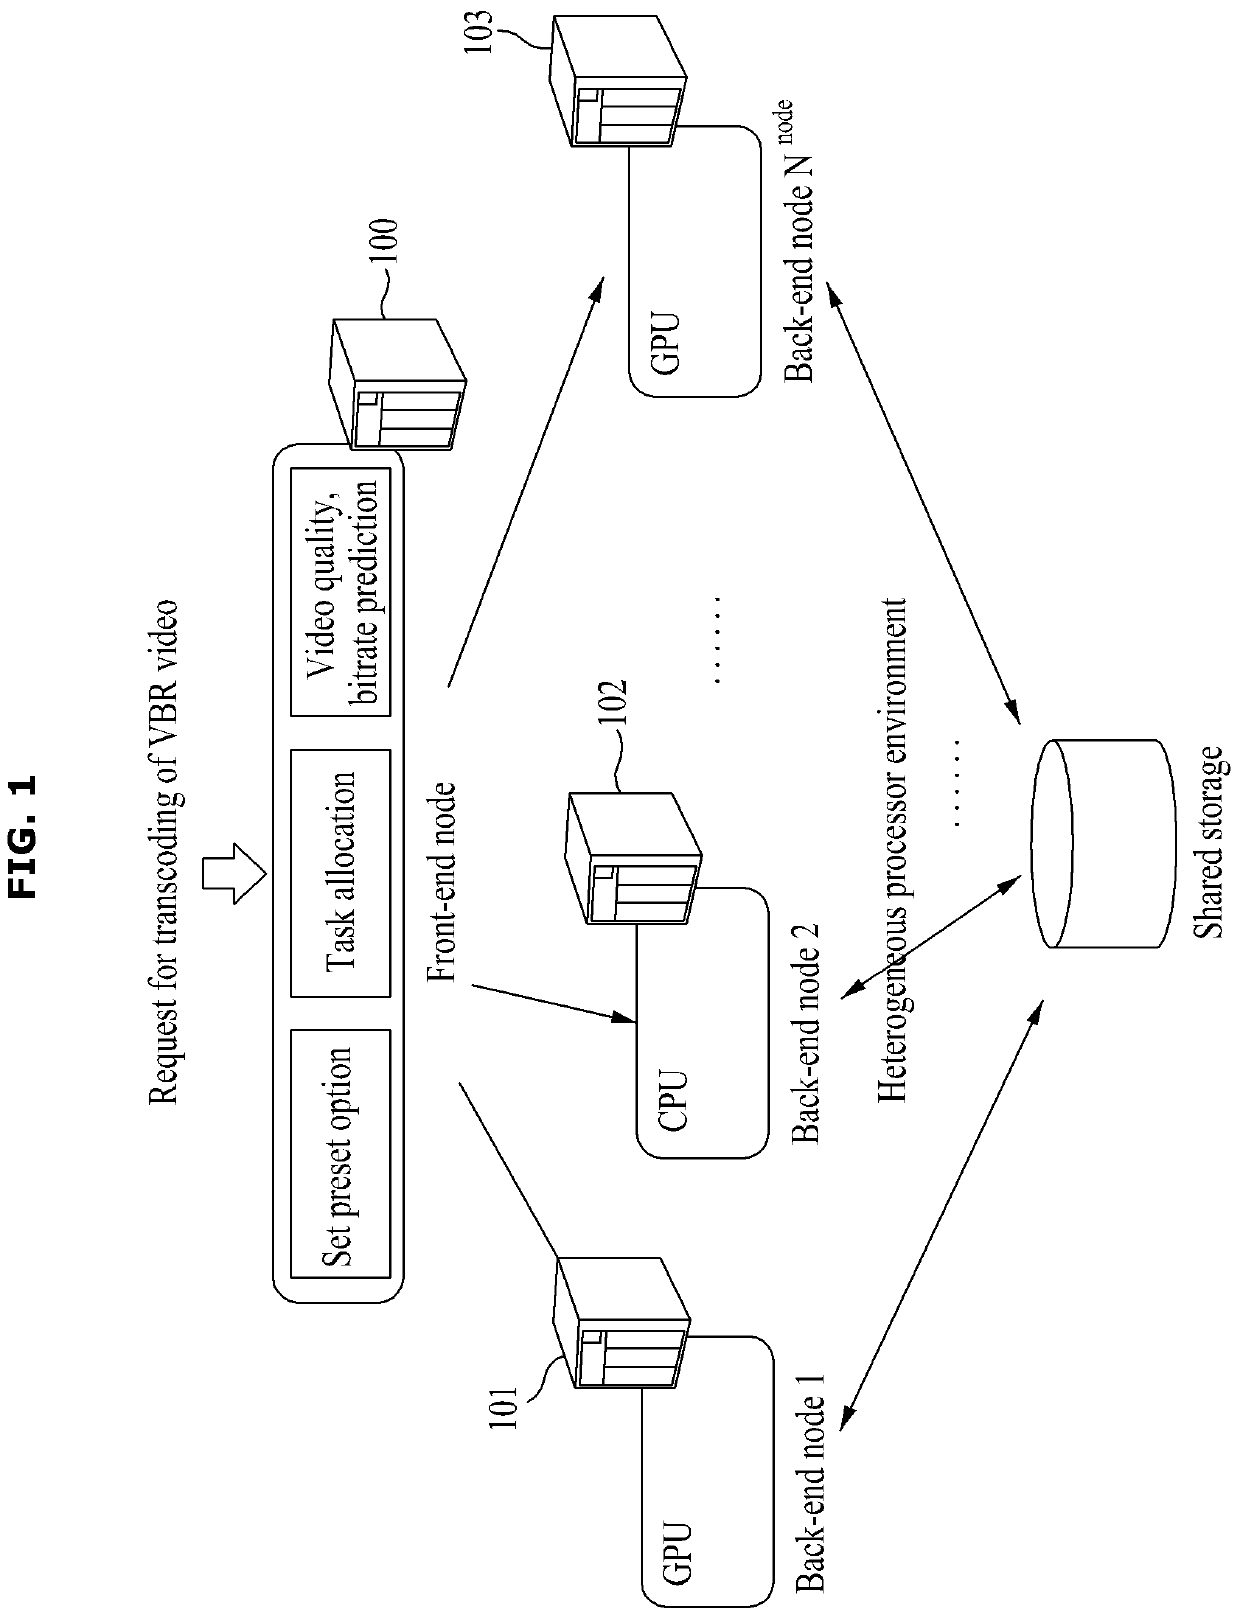 Method for allocating and scheduling task for maximizing video quality of transcoding server using heterogeneous processors